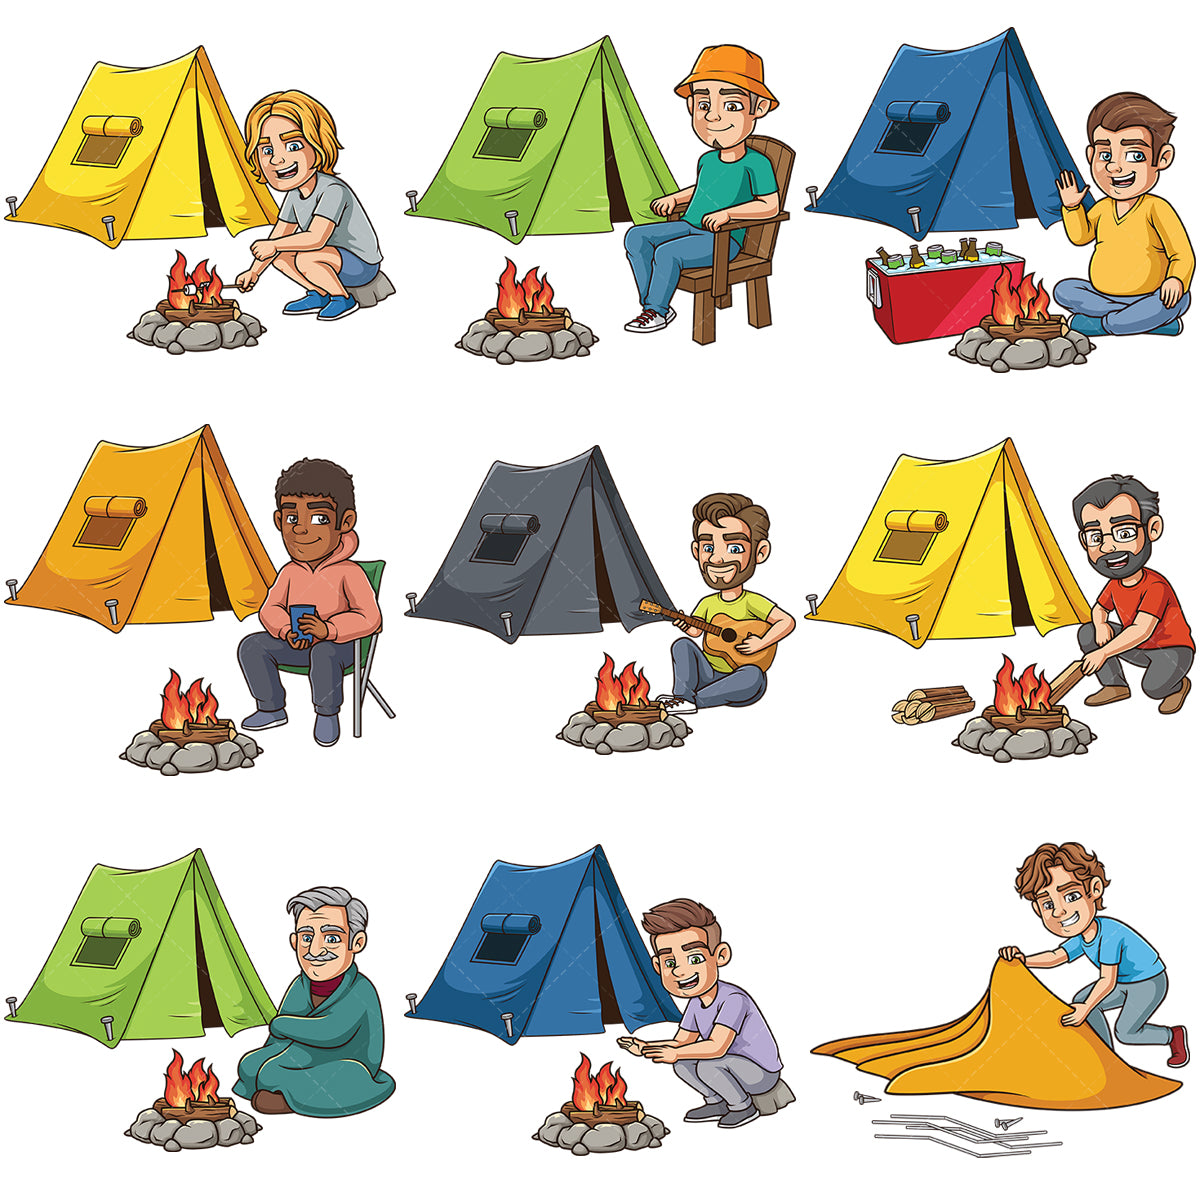 A bundle of 9 royalty-free stock vector illustrations of men camping.